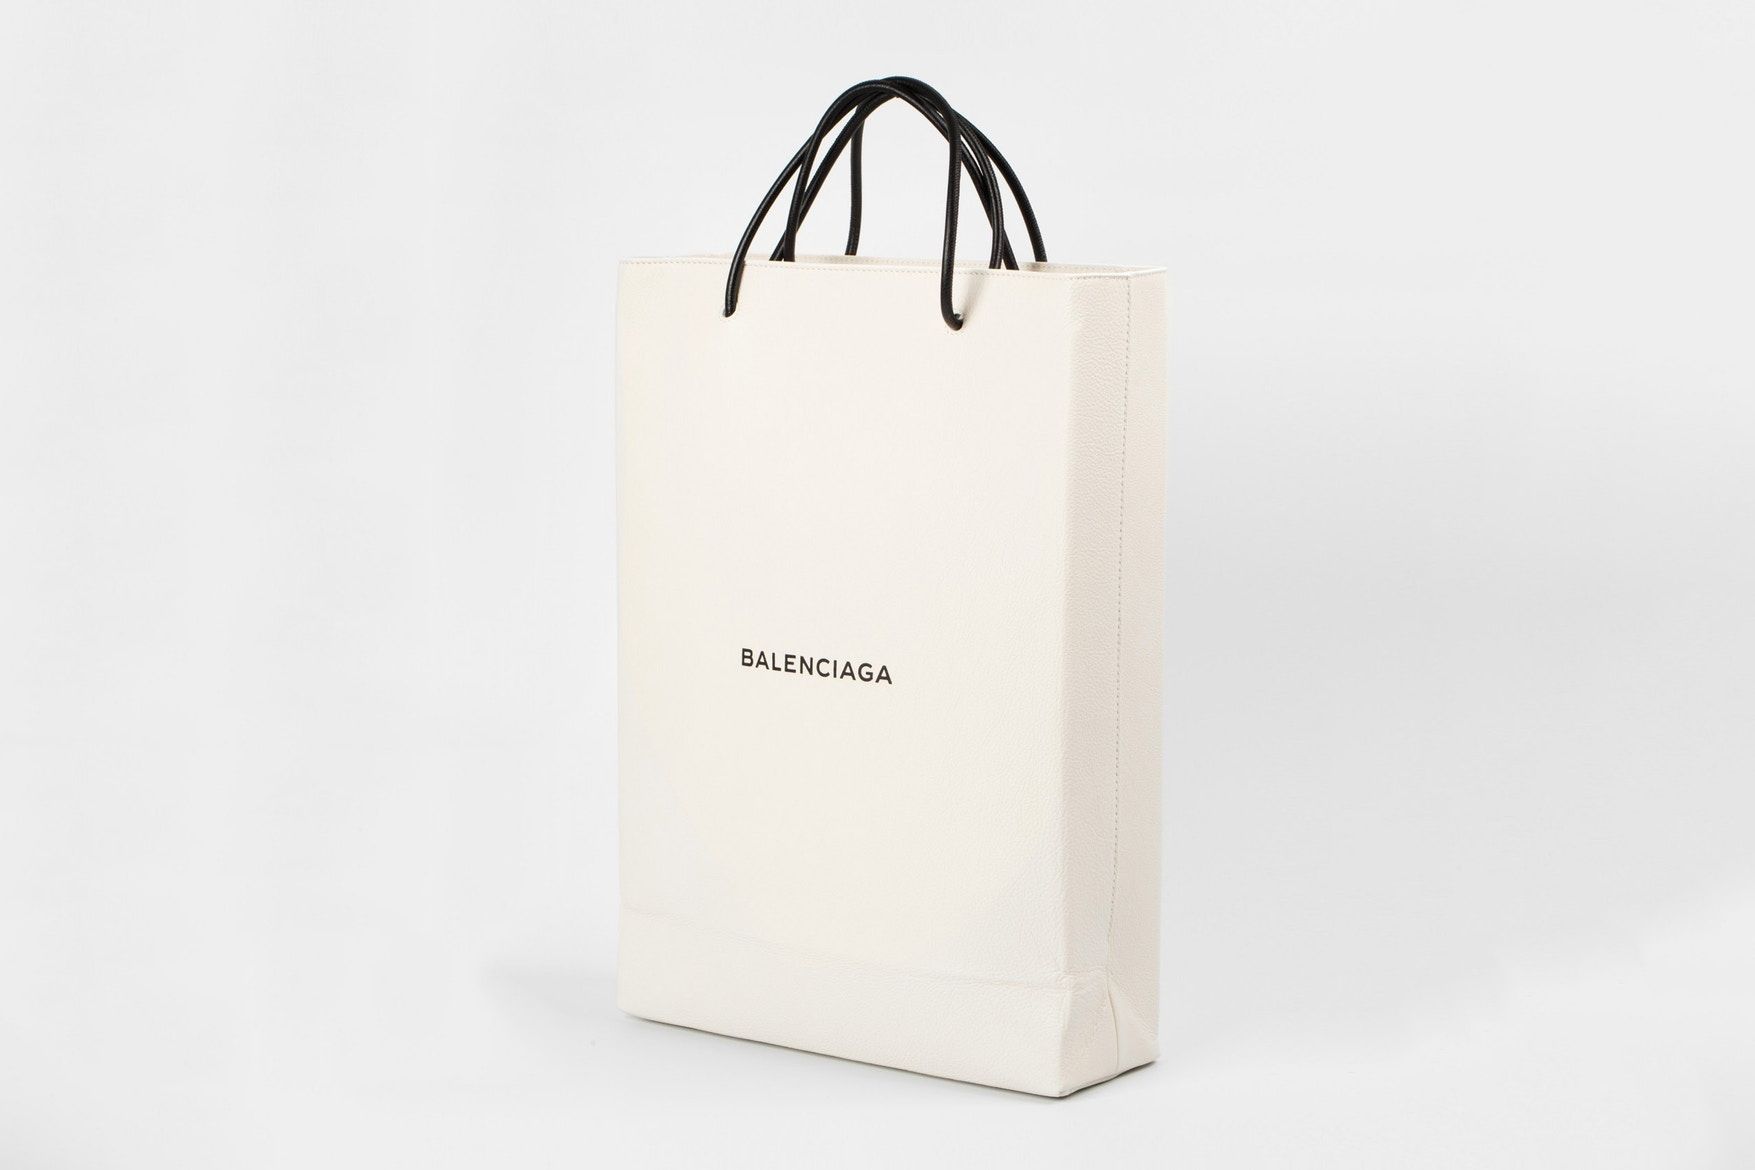 Ikea Frakta Shopping Bag Is Getting a Chic Makeover From Off-White